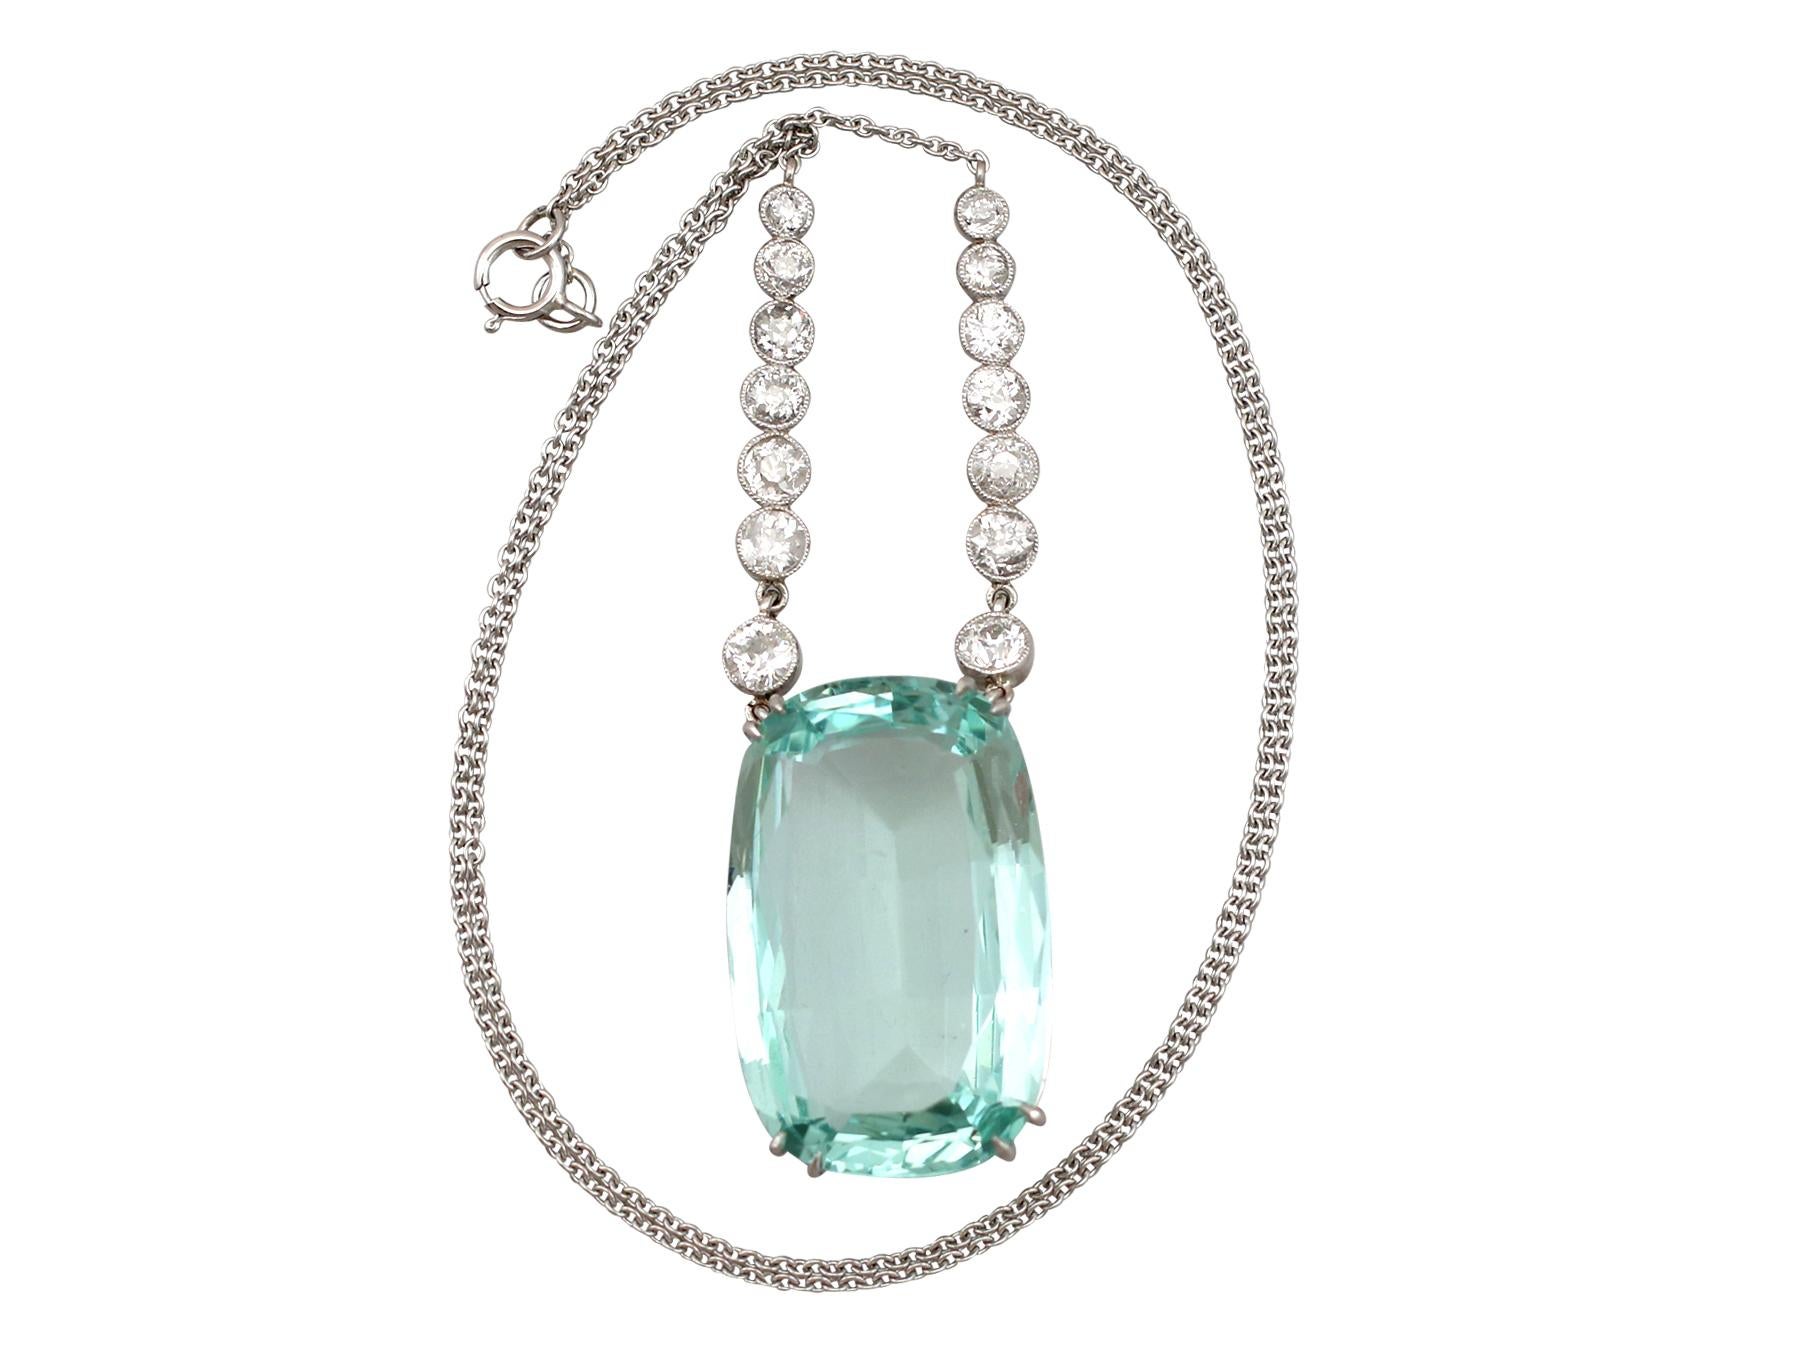 A stunning antique 24 carat aquamarine and 2.17 carat diamond, platinum necklace; part of our diverse antique jewelry and estate jewelry collections.

This stunning, fine and impressive antique aquamarine and diamond necklace has been crafted in